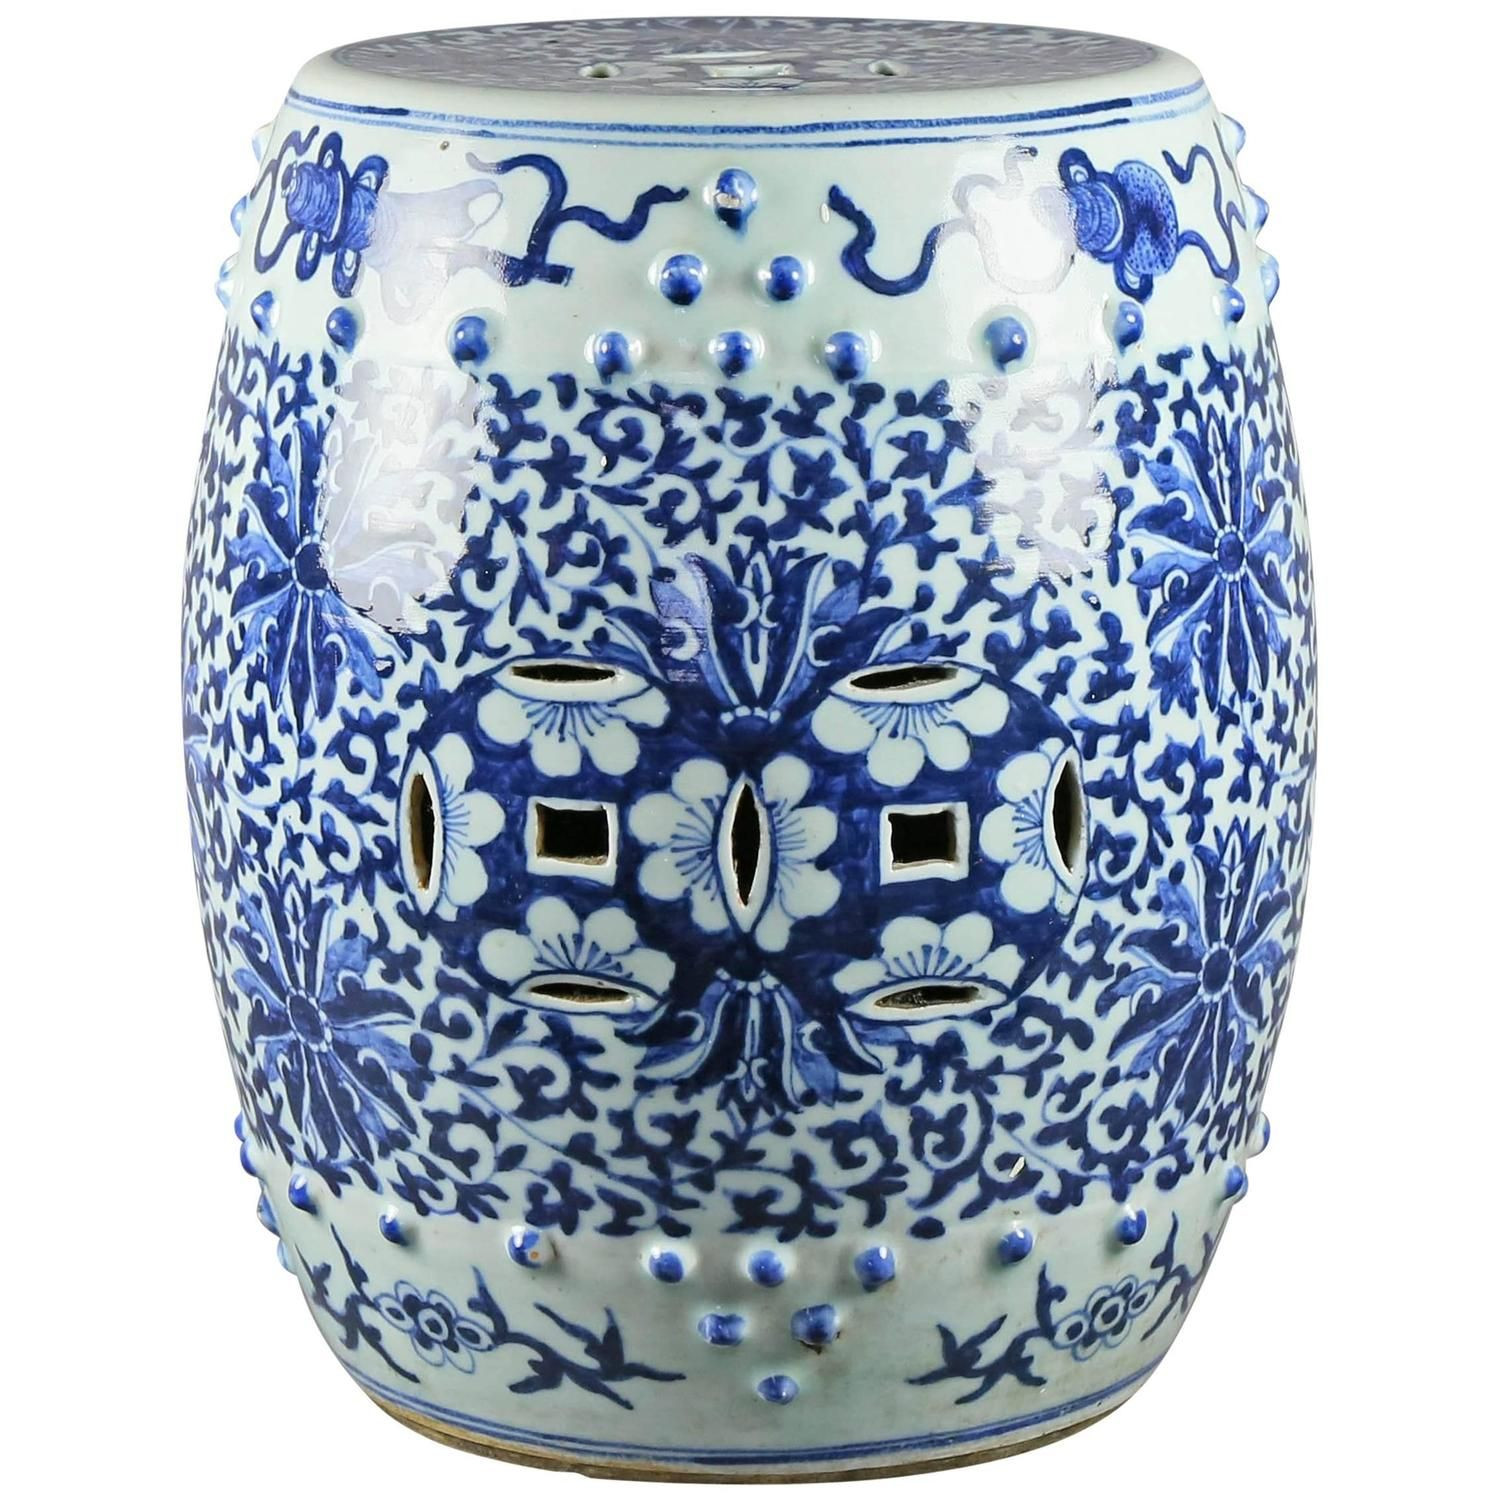 19 Stylish Tall Chinese Vases for Sale 2022 free download tall chinese vases for sale of chinese blue and white porcelain miniature garden seat garden seat throughout chinese blue and white porcelain miniature garden seat